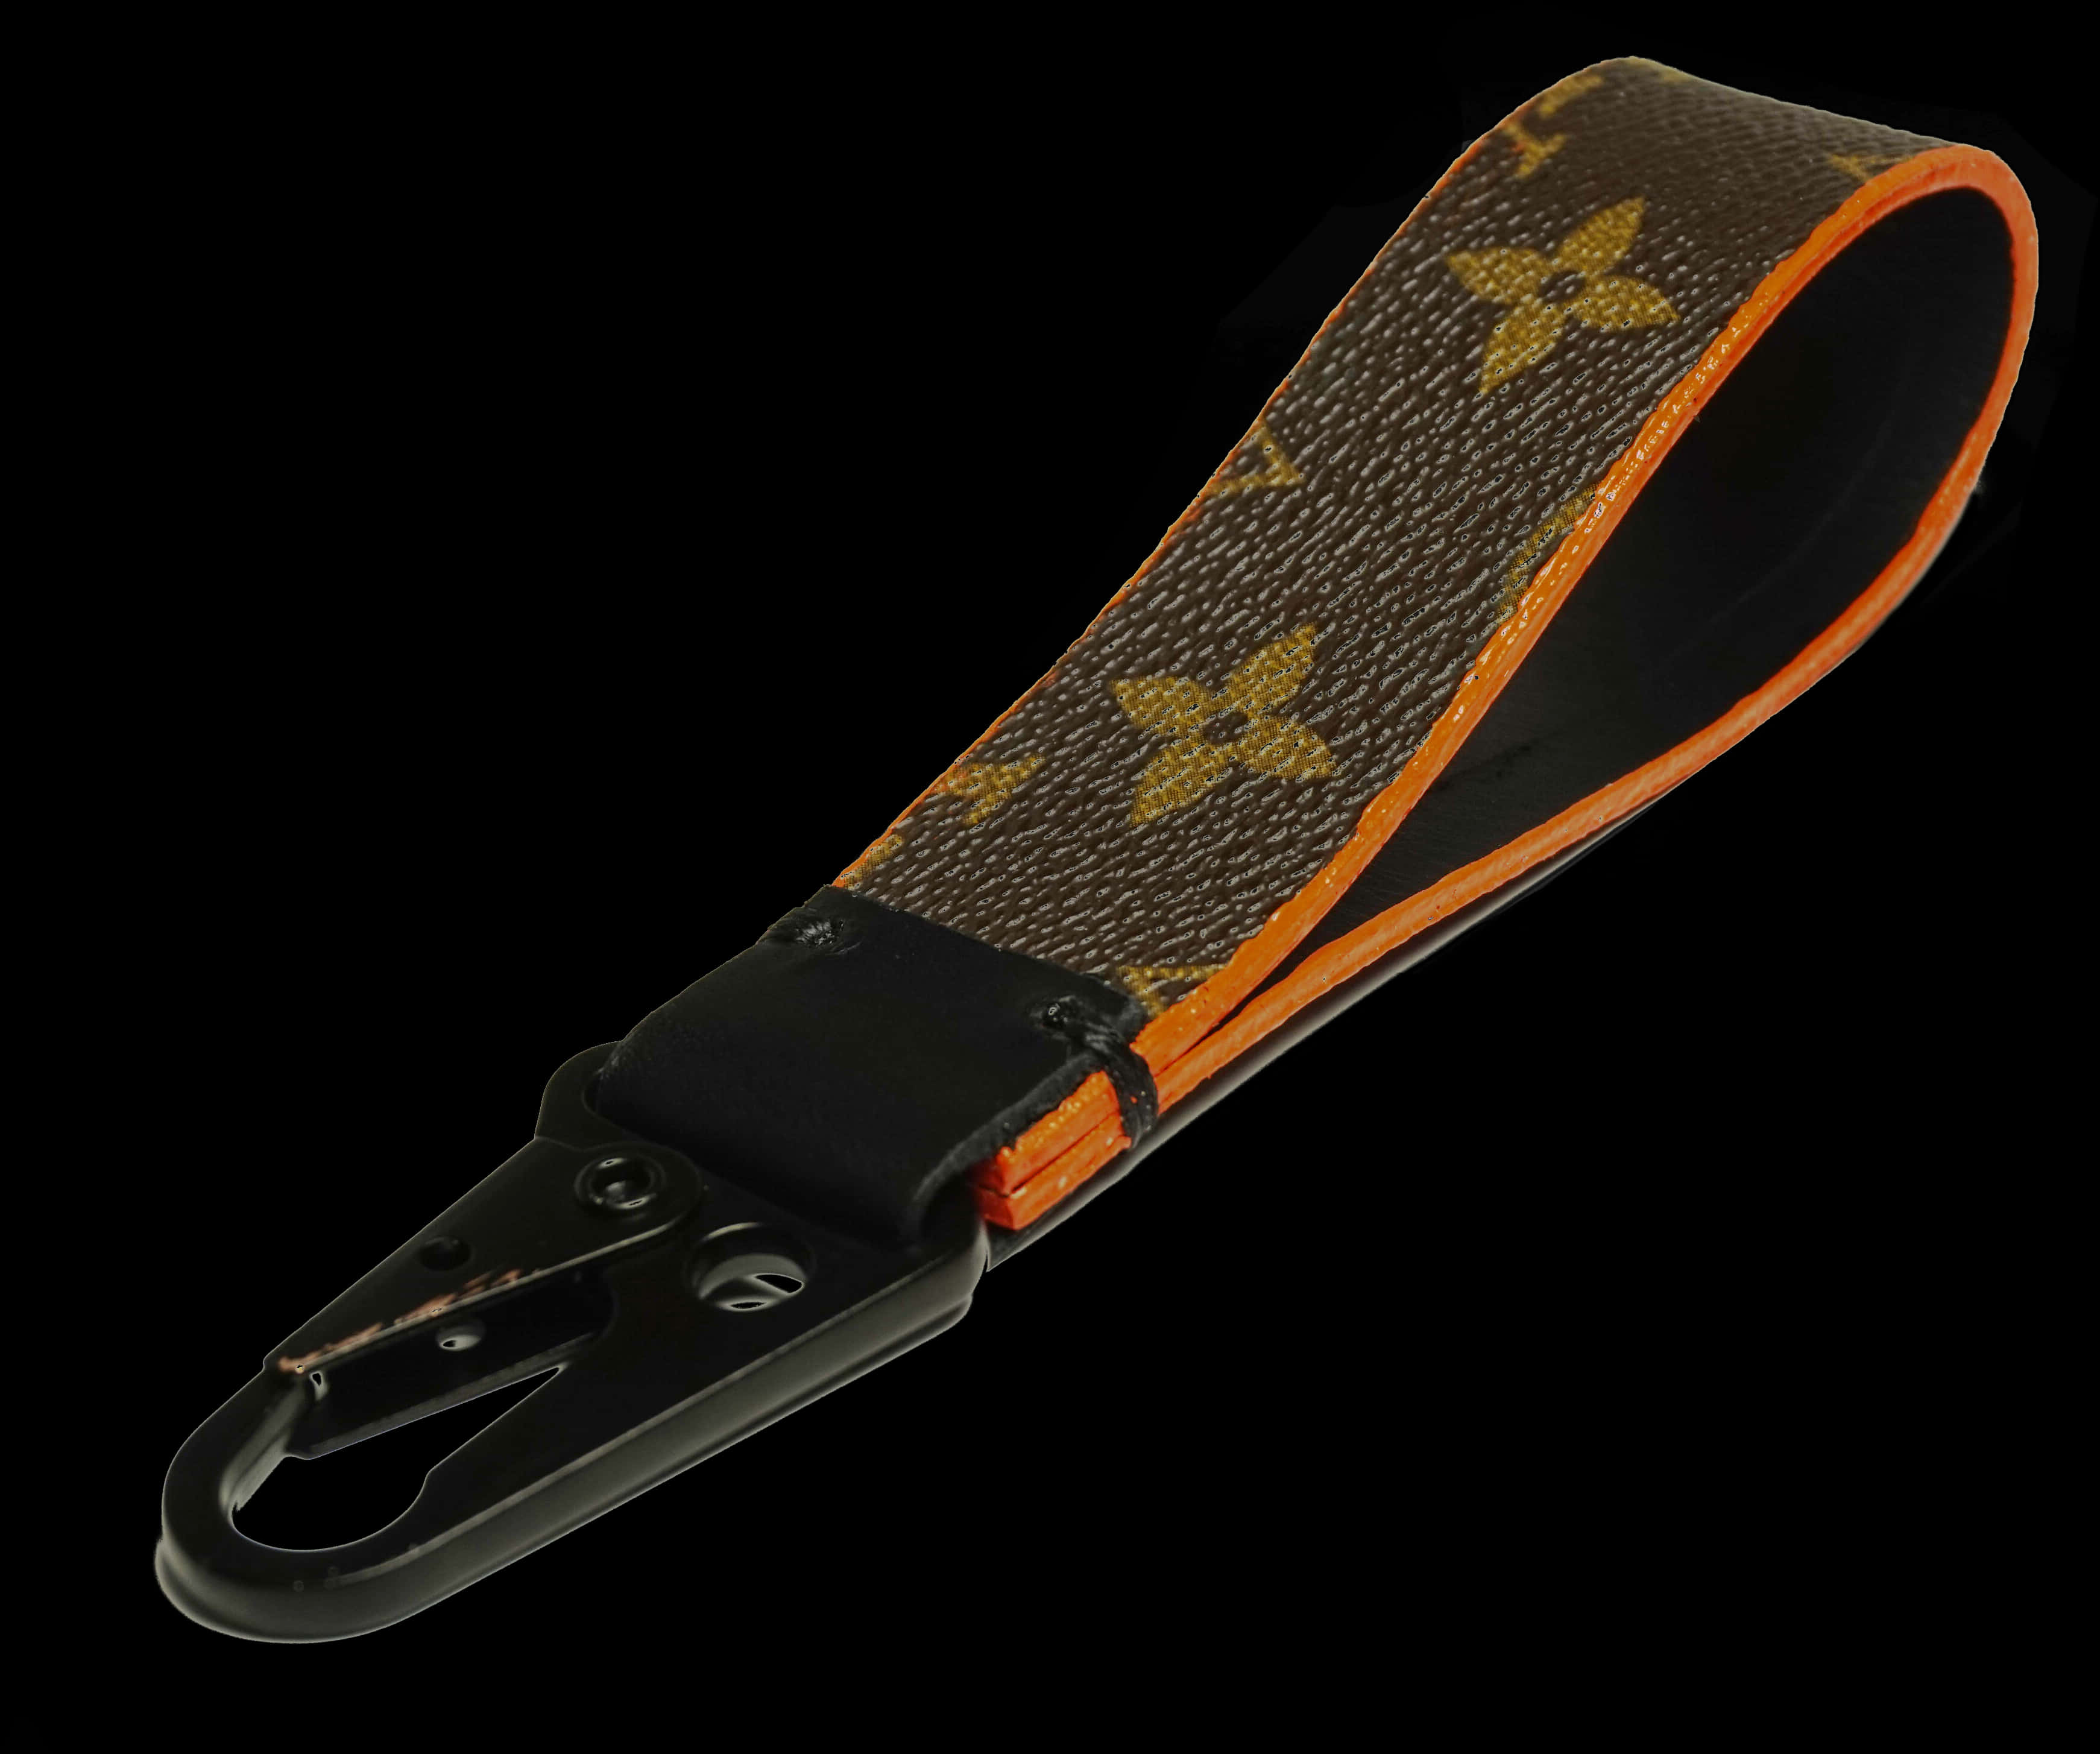 A Brown And Orange Strap With A Black Handle